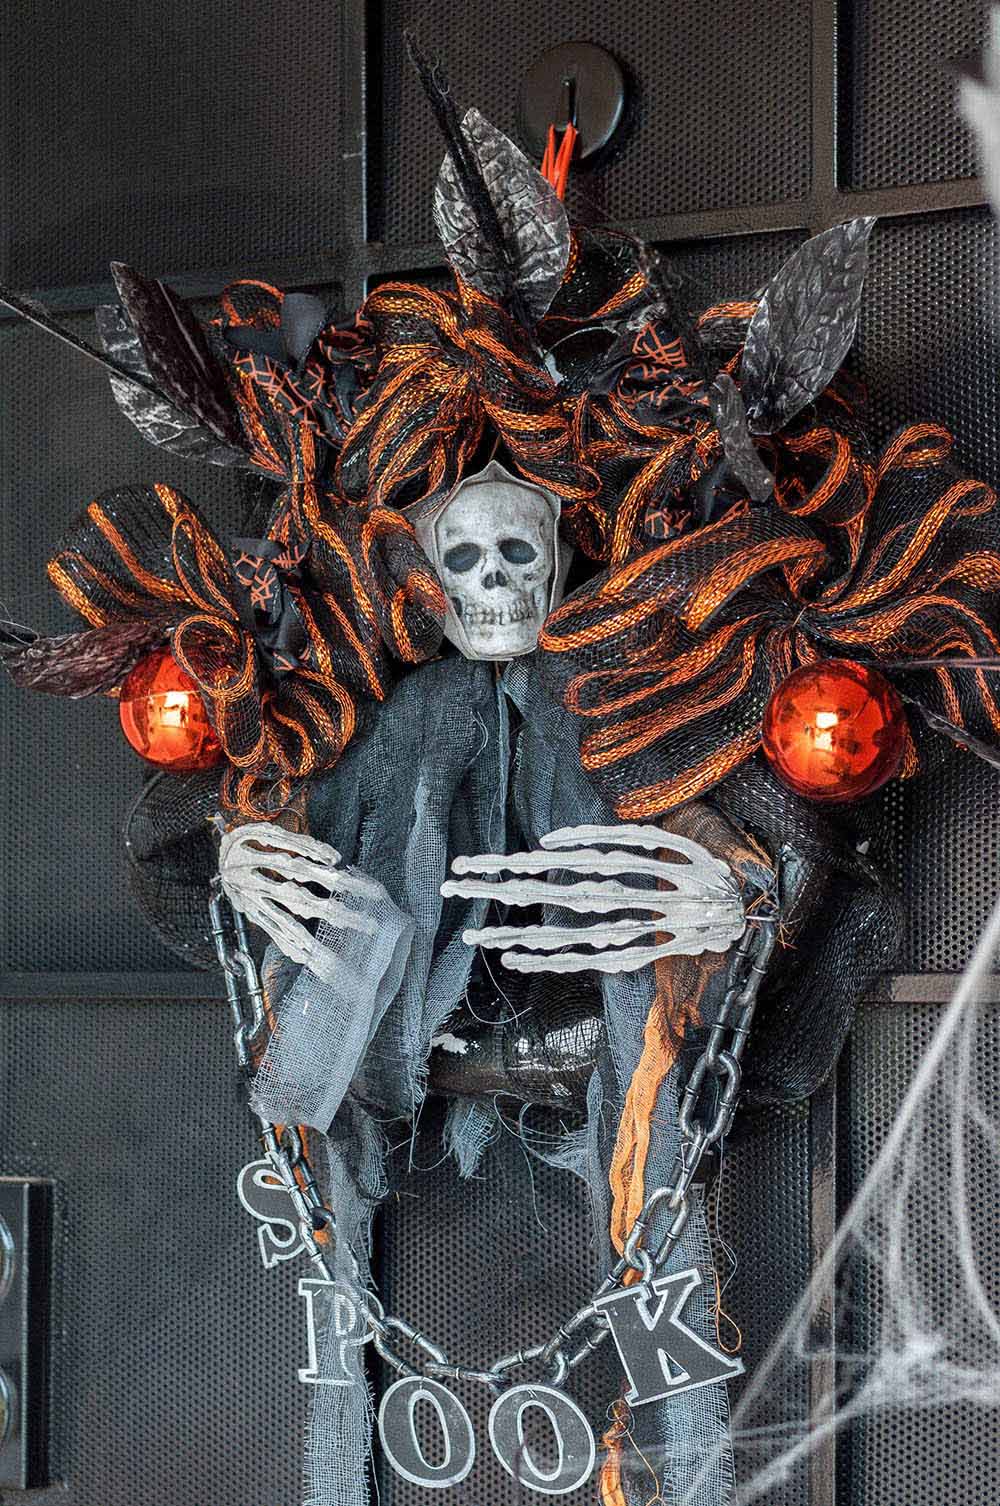 An orange and black Halloween wreath with a skeleton and chains decorates a front door.